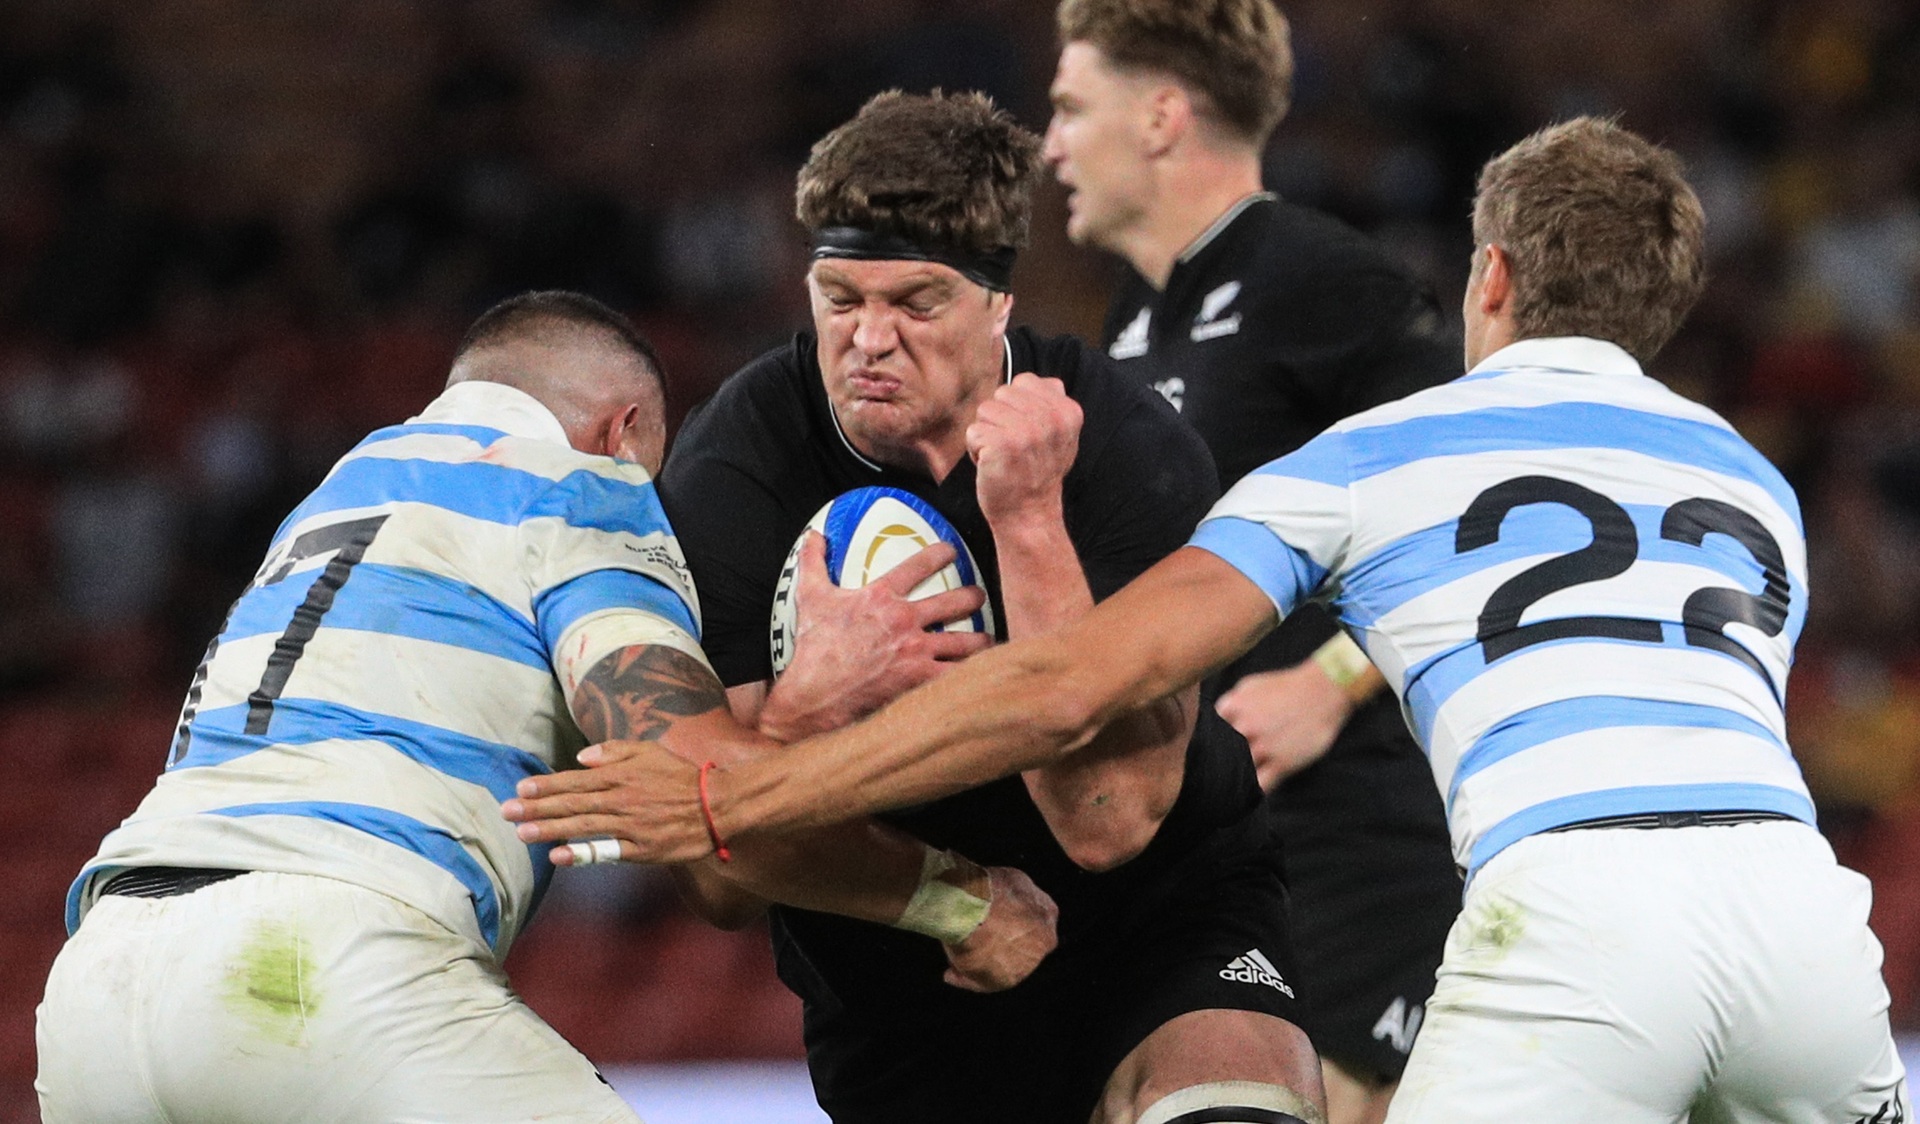 All Blacks v Argentina Kickoff time, how to watch in NZ, live streaming, teams, odds - all you need to know